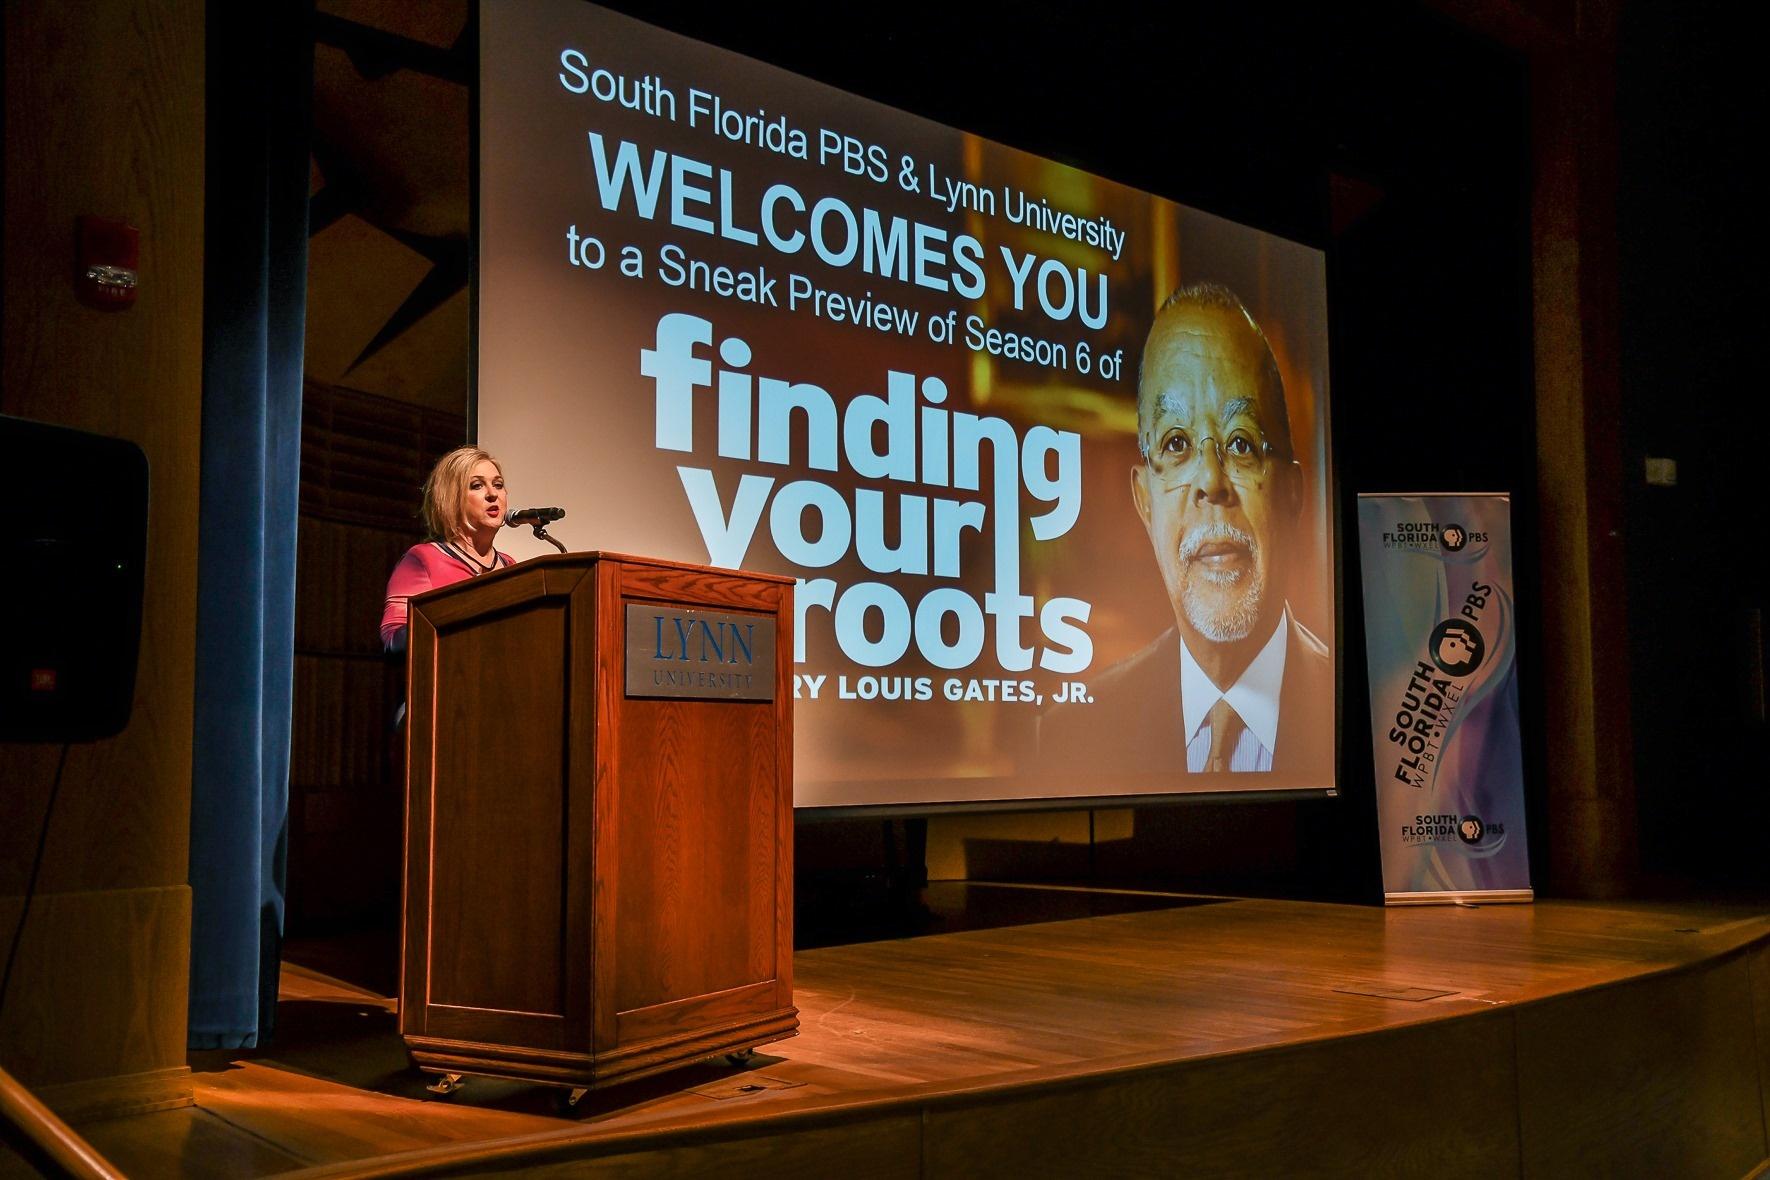 Finding Your Roots Screening at Lynn University